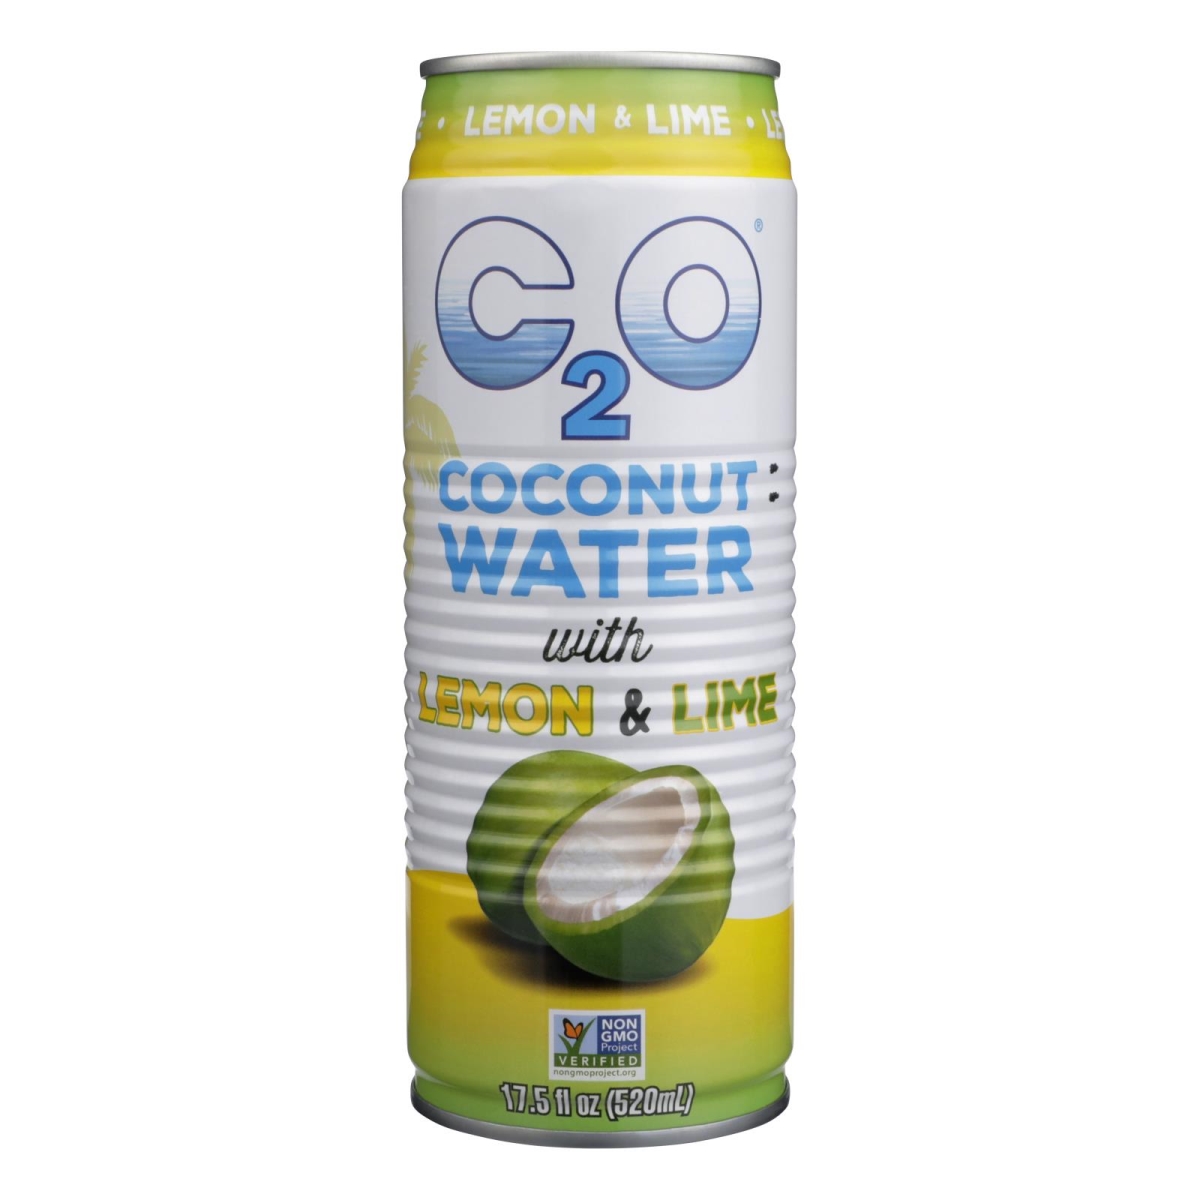 Picture of C2O Pure Coconut Water HG2379089 17.5 oz Pure Coconut Water Lime - Case of 12